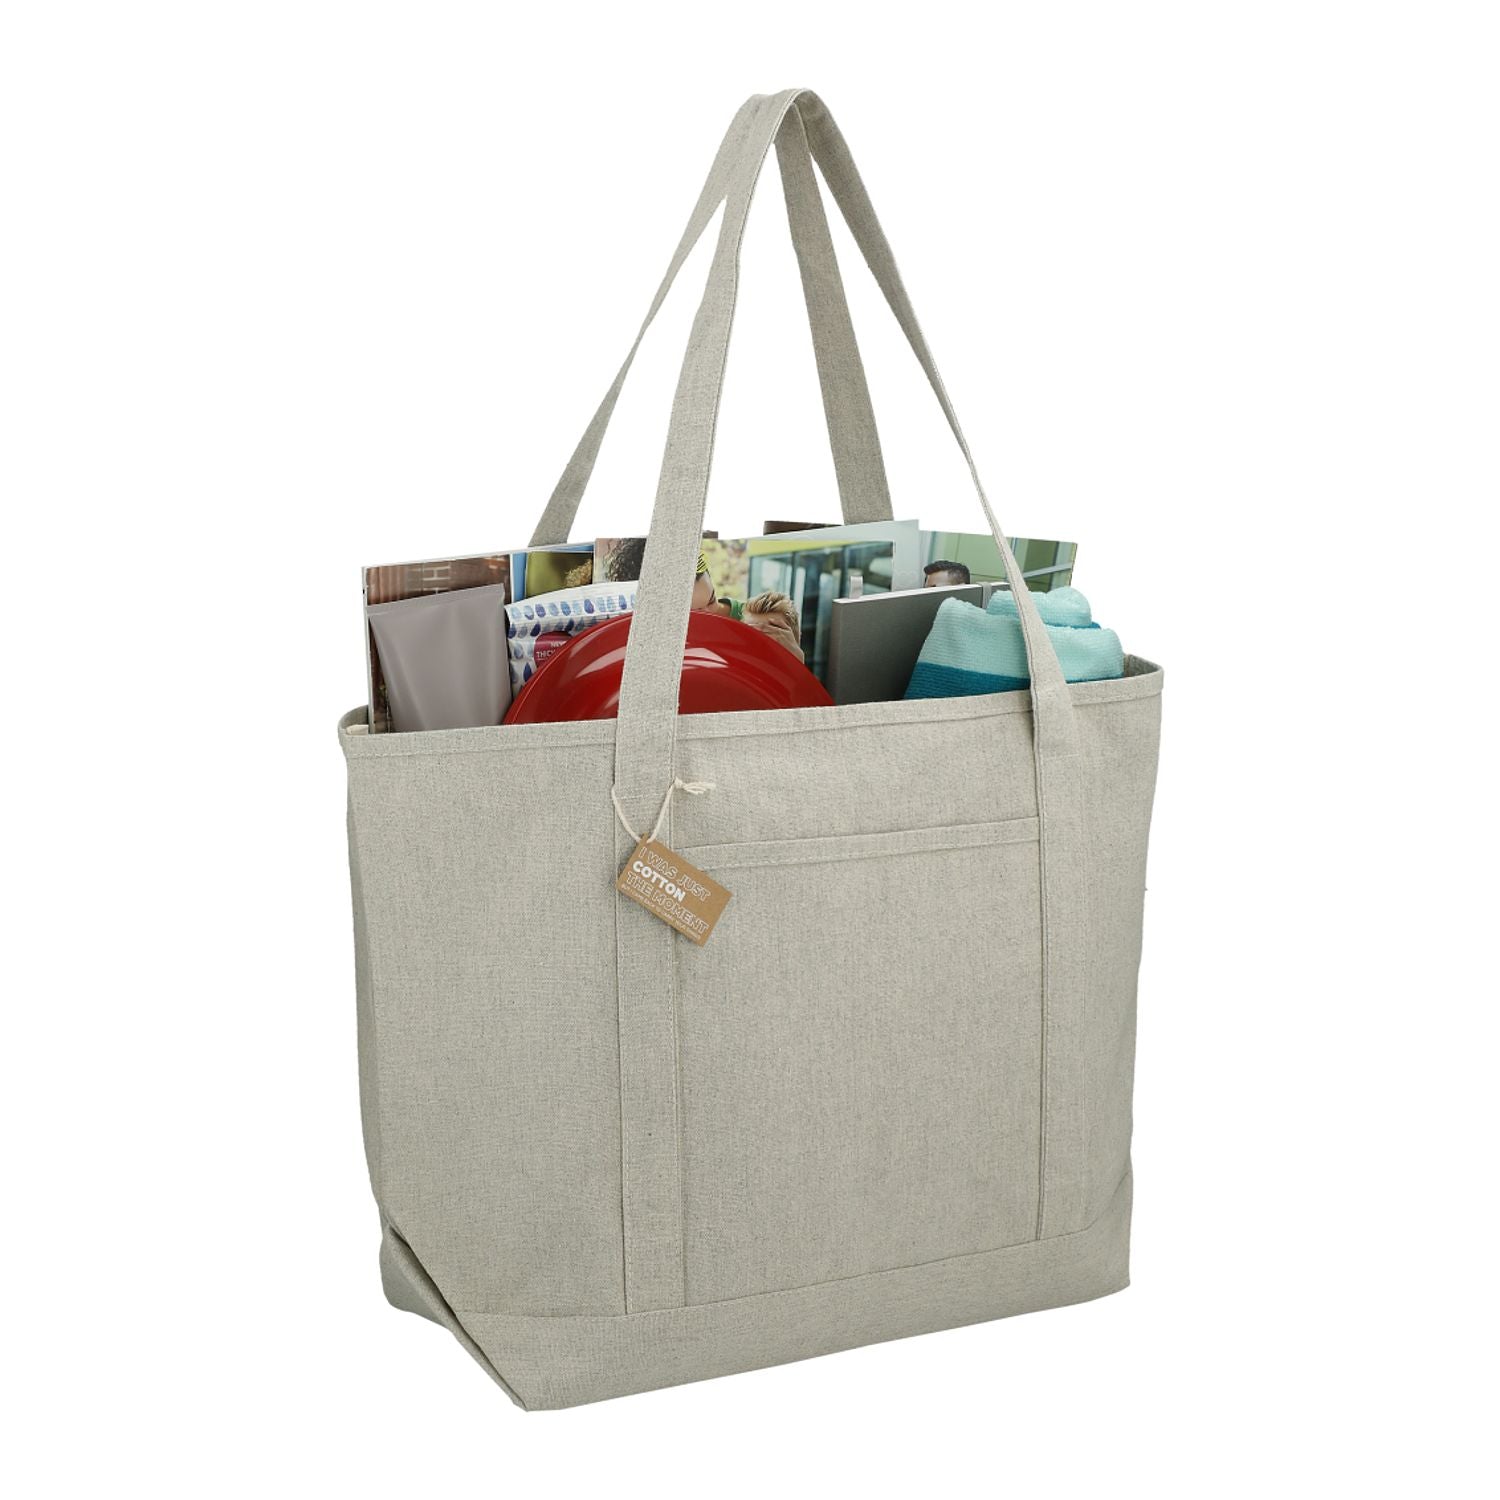 Customizable Repose 10oz Recycled Cotton Boat ToteCustomizable Repose 10oz Recycled Cotton Boat Tote in gray.